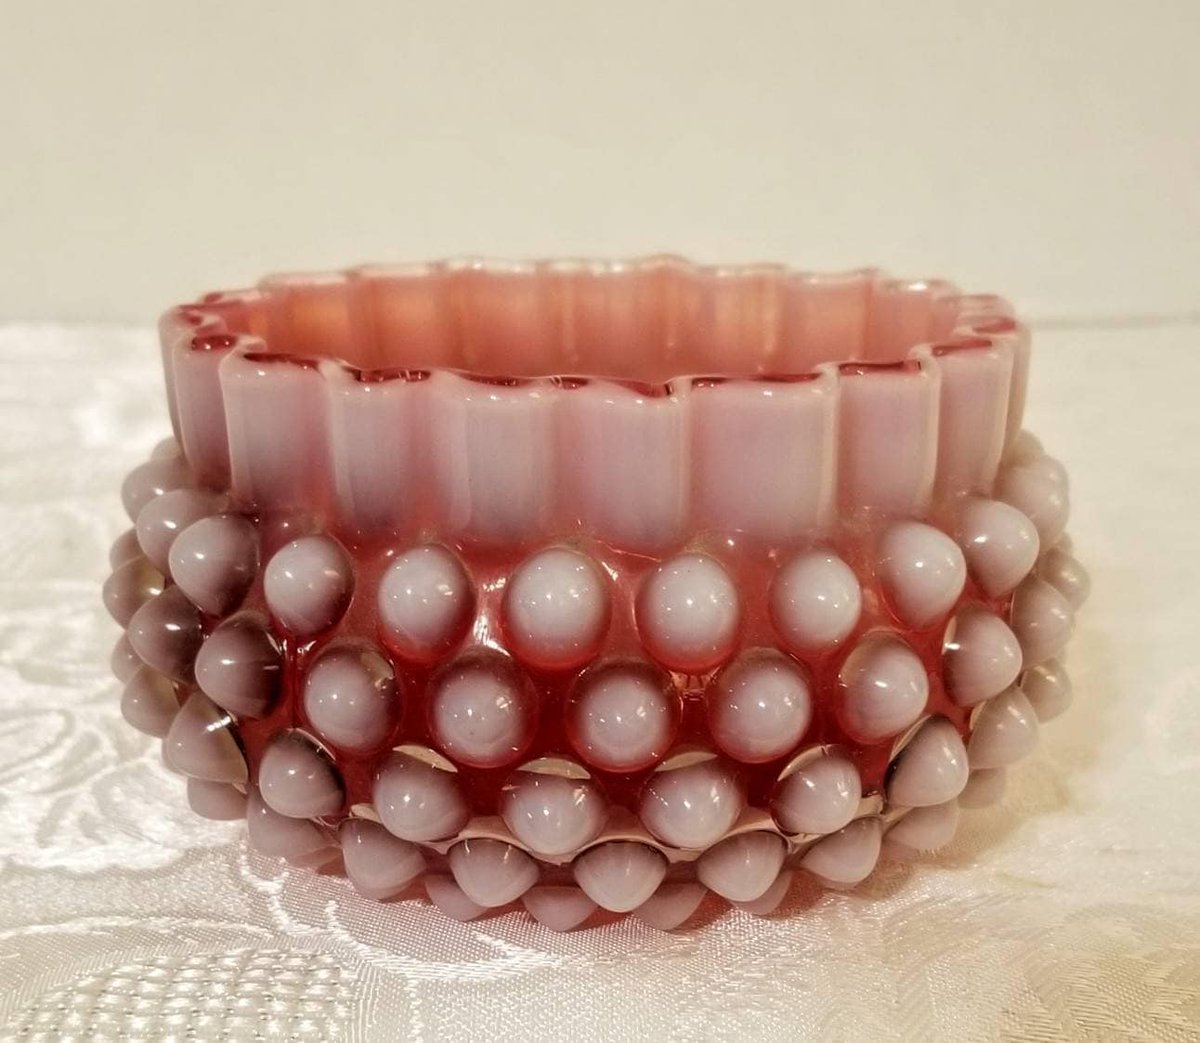 Excited to share the latest addition to my #etsy shop: Cranberry Opalescent Hobnail Finger Bowl Rare Hobbs, Brockunier And Company etsy.me/3yBRYUU #cranberryglass #cranberryopalescent #fentonglass #carnivalglass #hobbsbrockunier #hobnailglass #collectableglass